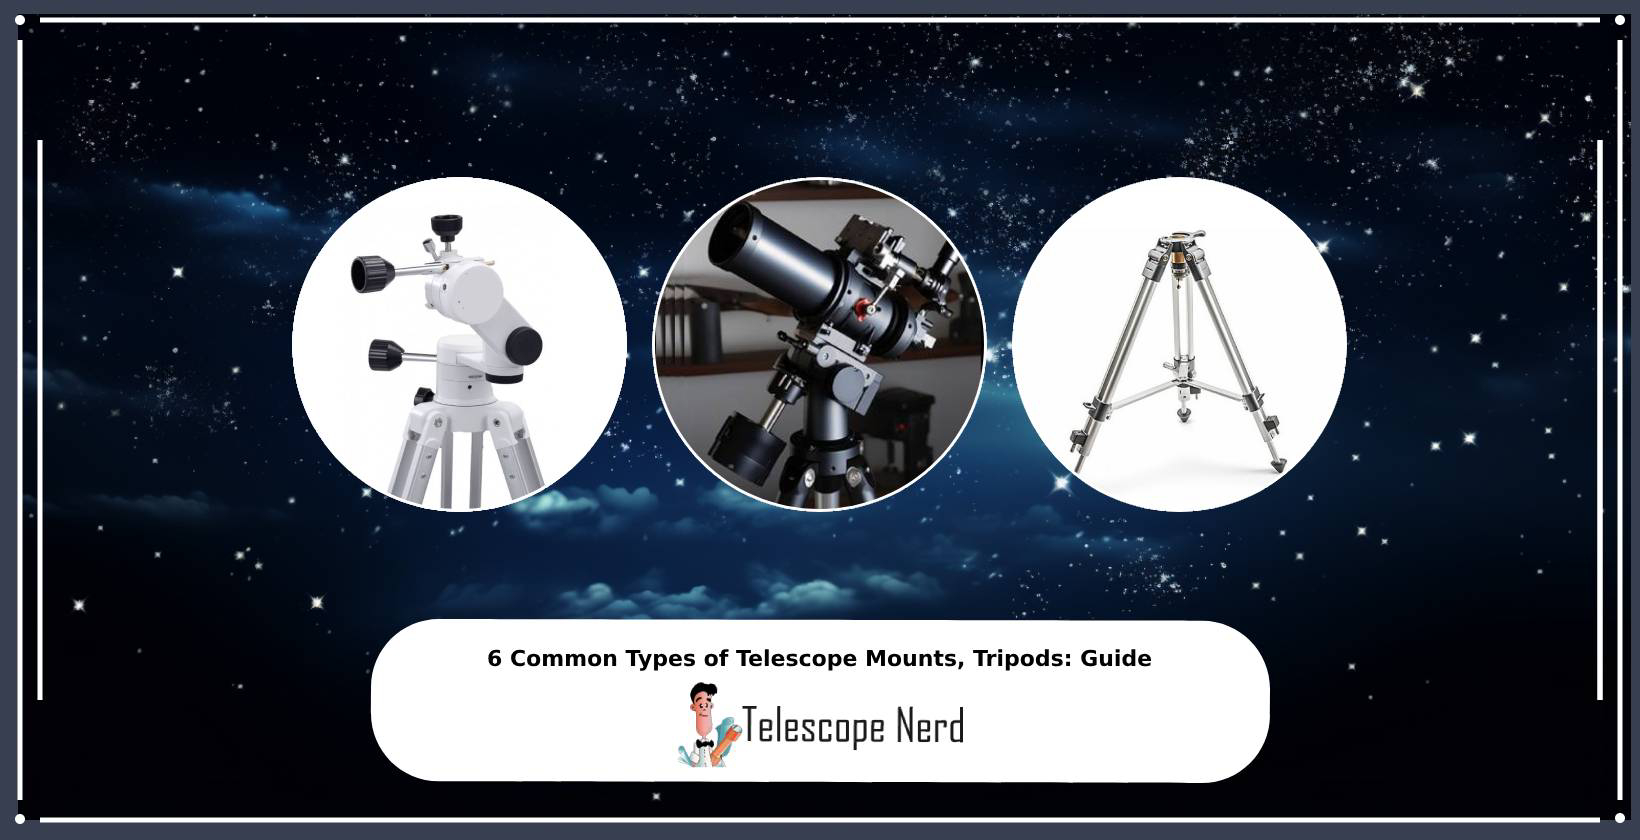 6 Common Types of Telescope Mounts, Tripods: Guide